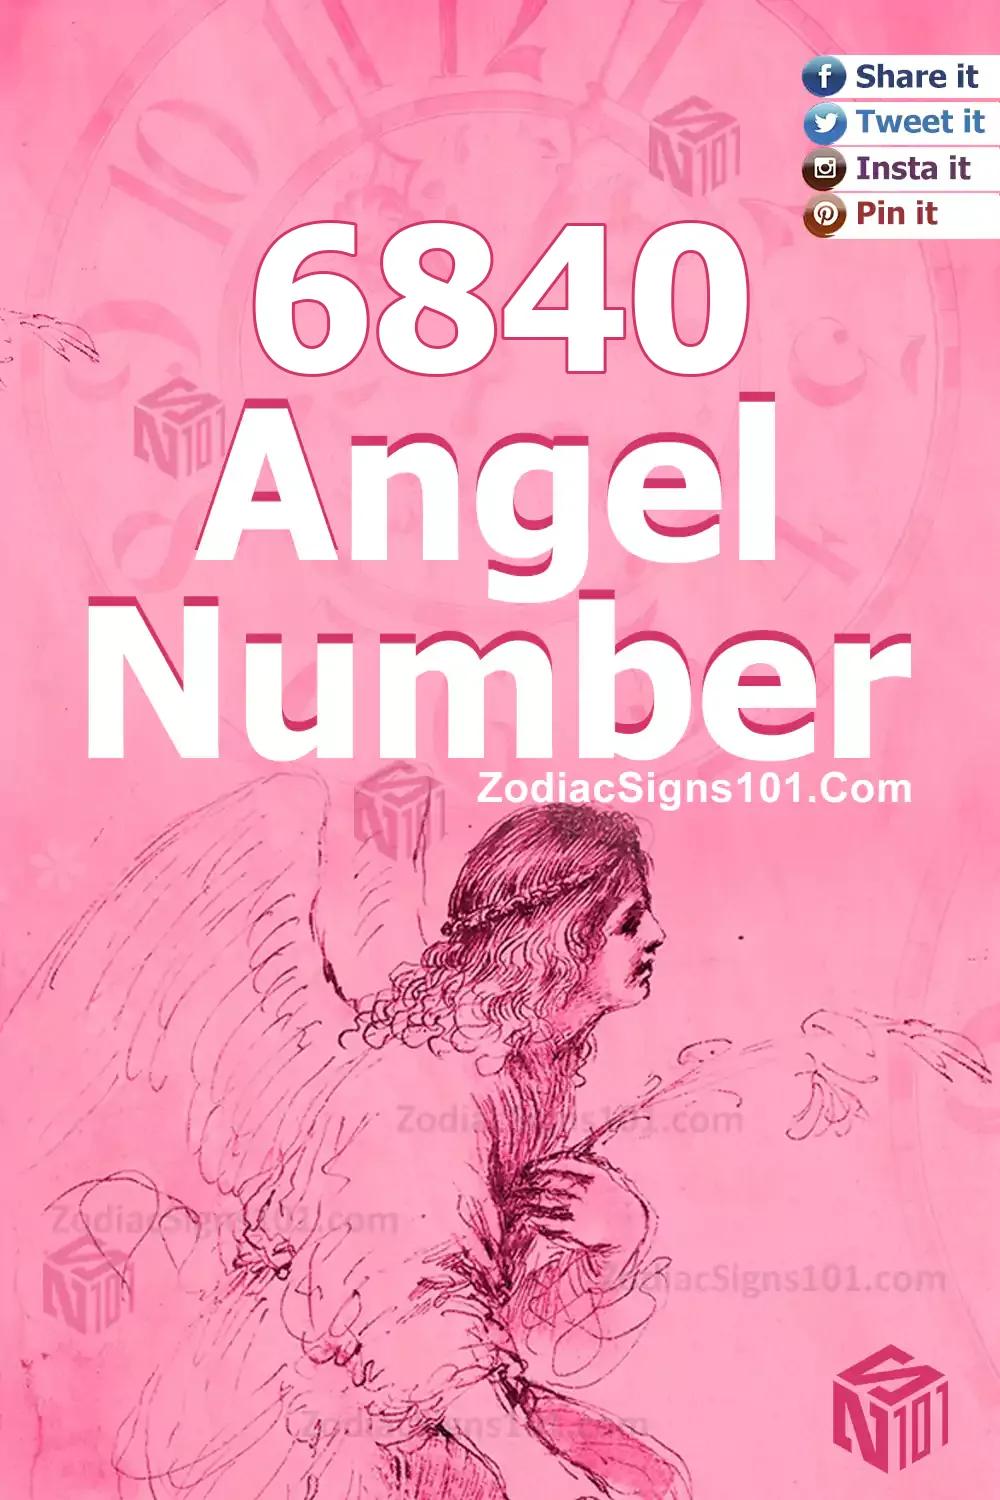 6840 Angel Number Meaning